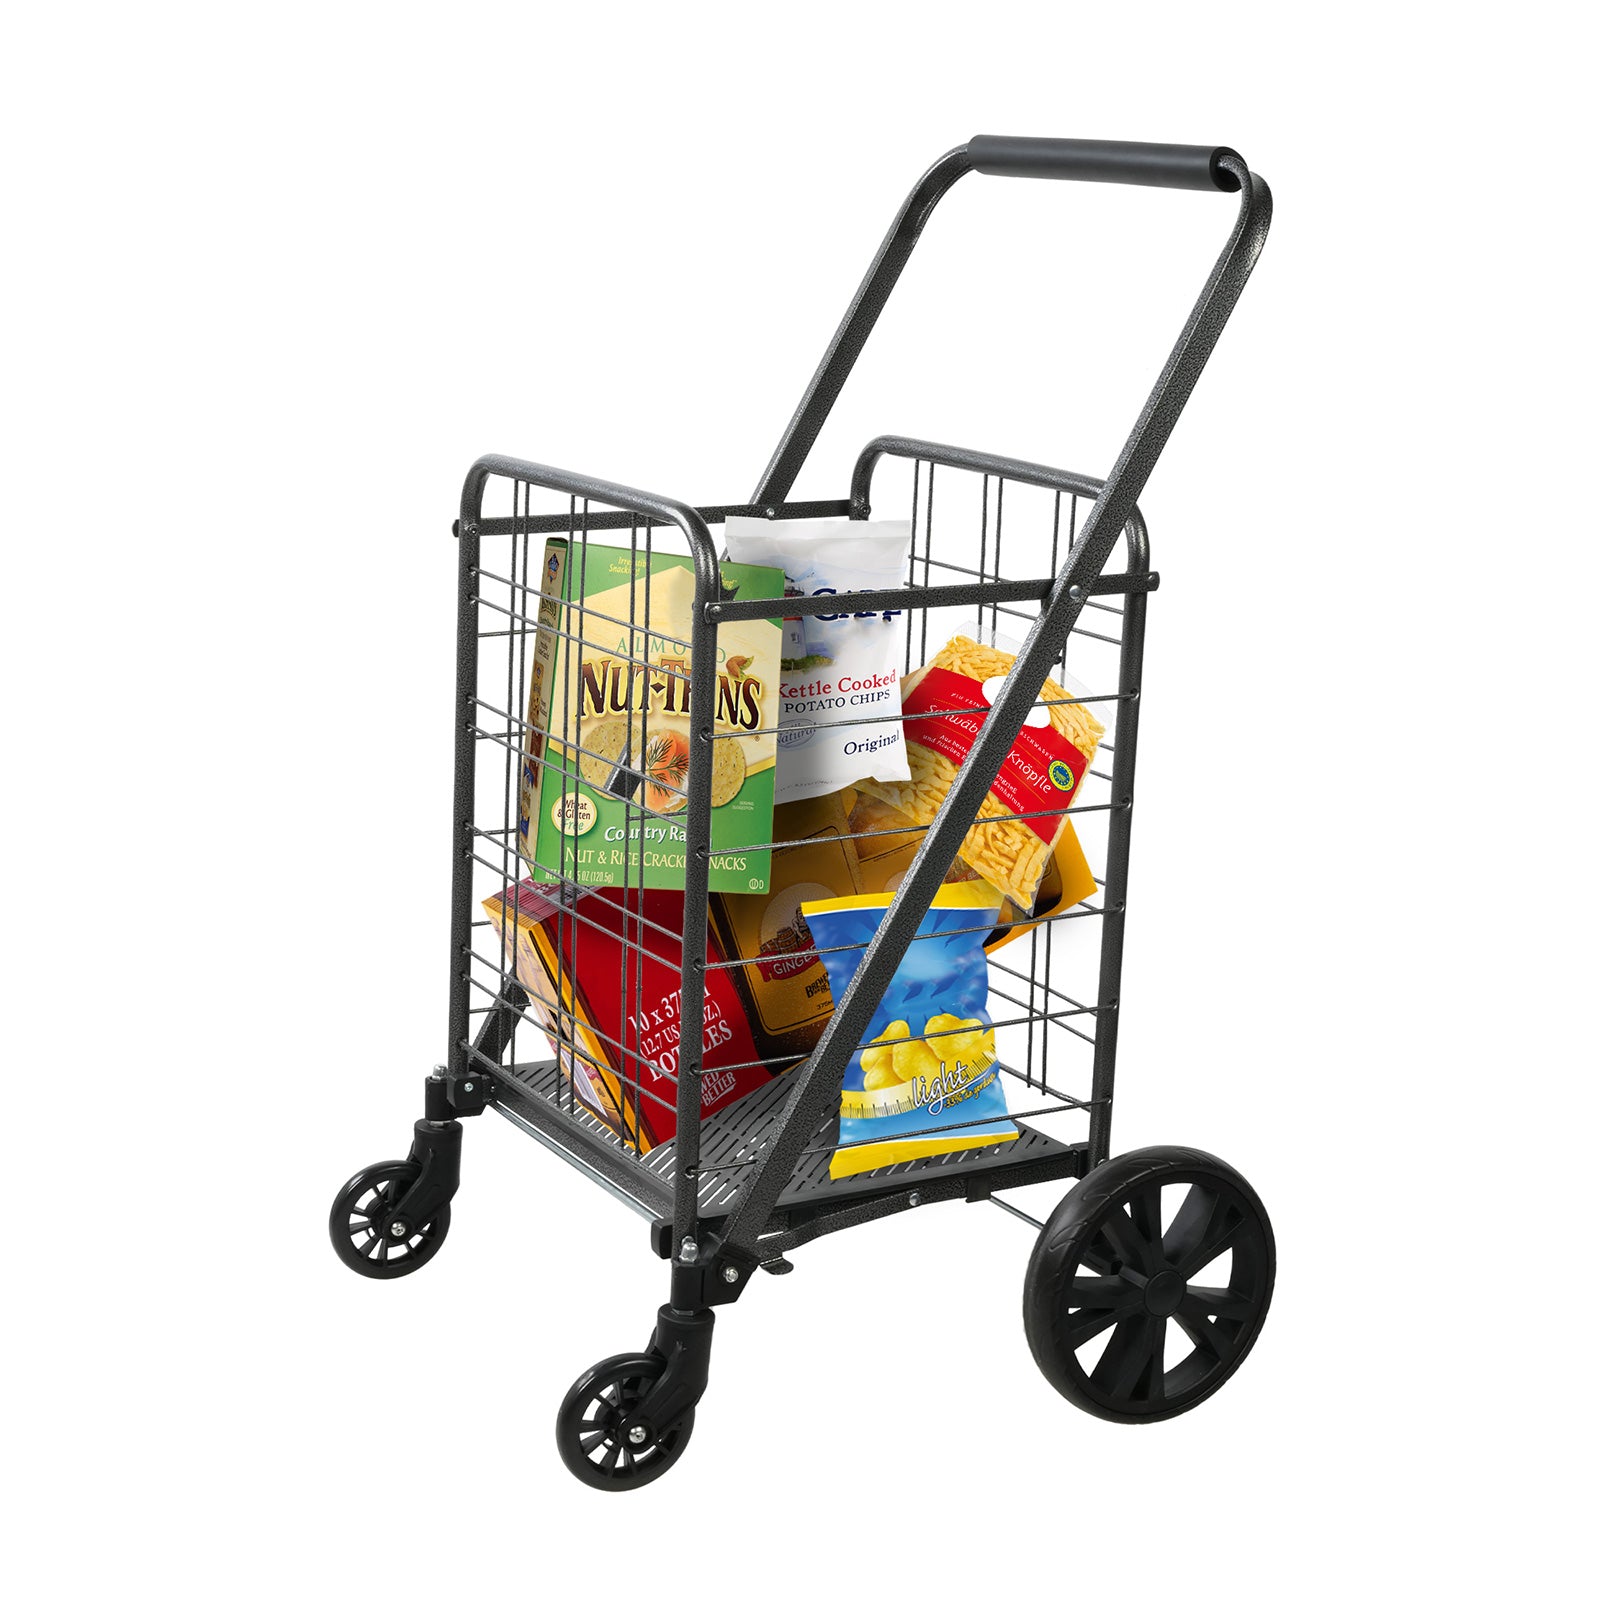 Folding Grocery Shopping Cart Collapsible Utility Cart with 360° Swivel Wheels, Black